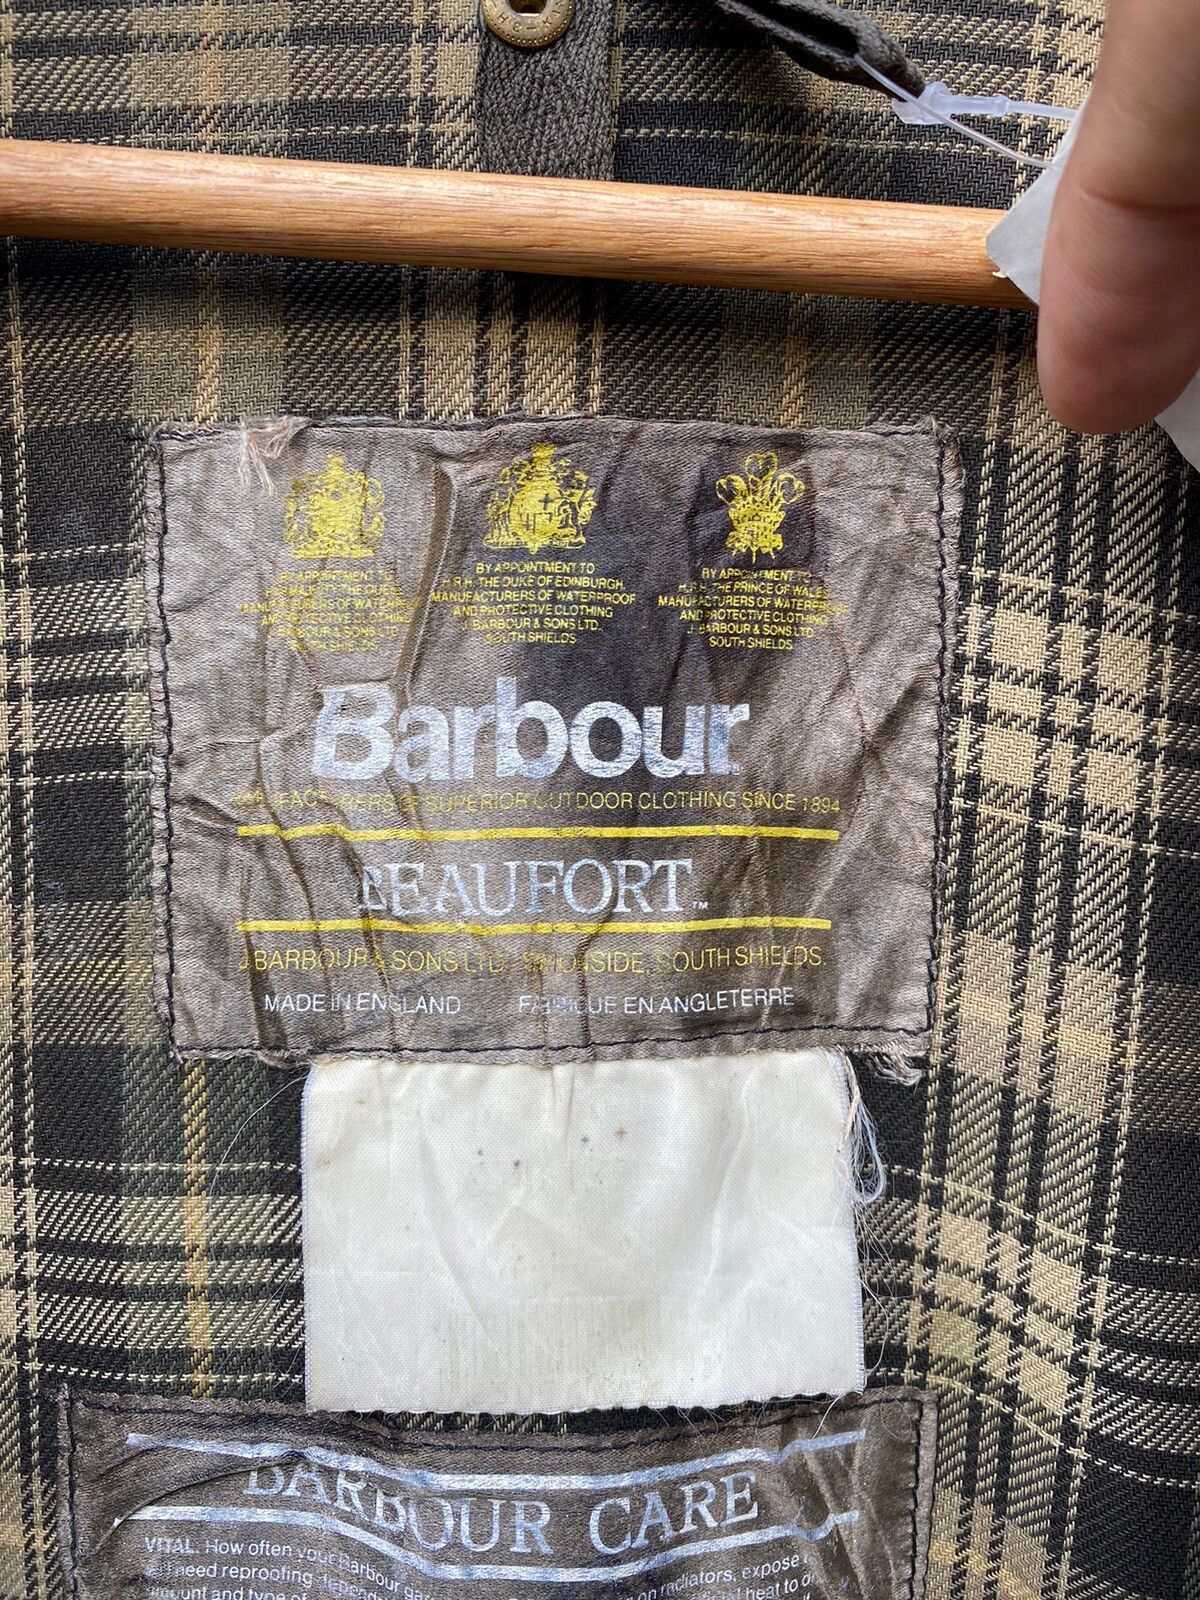 🏴󠁧󠁢󠁥󠁮󠁧󠁿 Vintage Barbour Classic Beaufort Waxed Jacket - 9